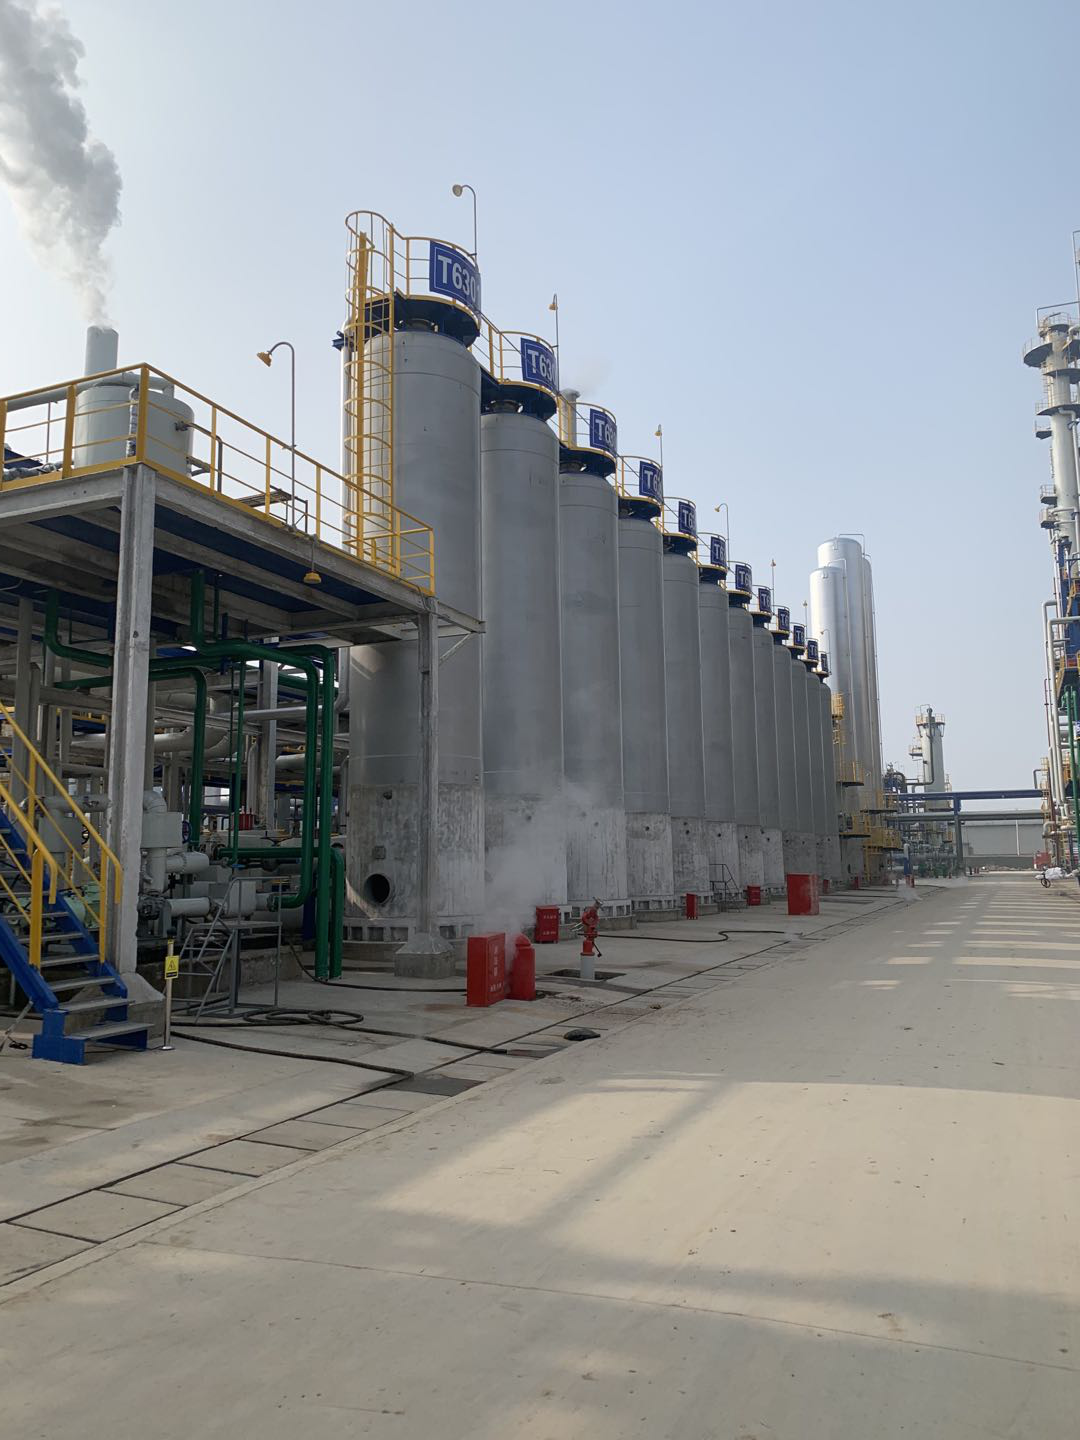 Shandong Dongfang Hualong Industry and Trade Group Co., Ltd. + 60000 methanol hydrogen production unit 2